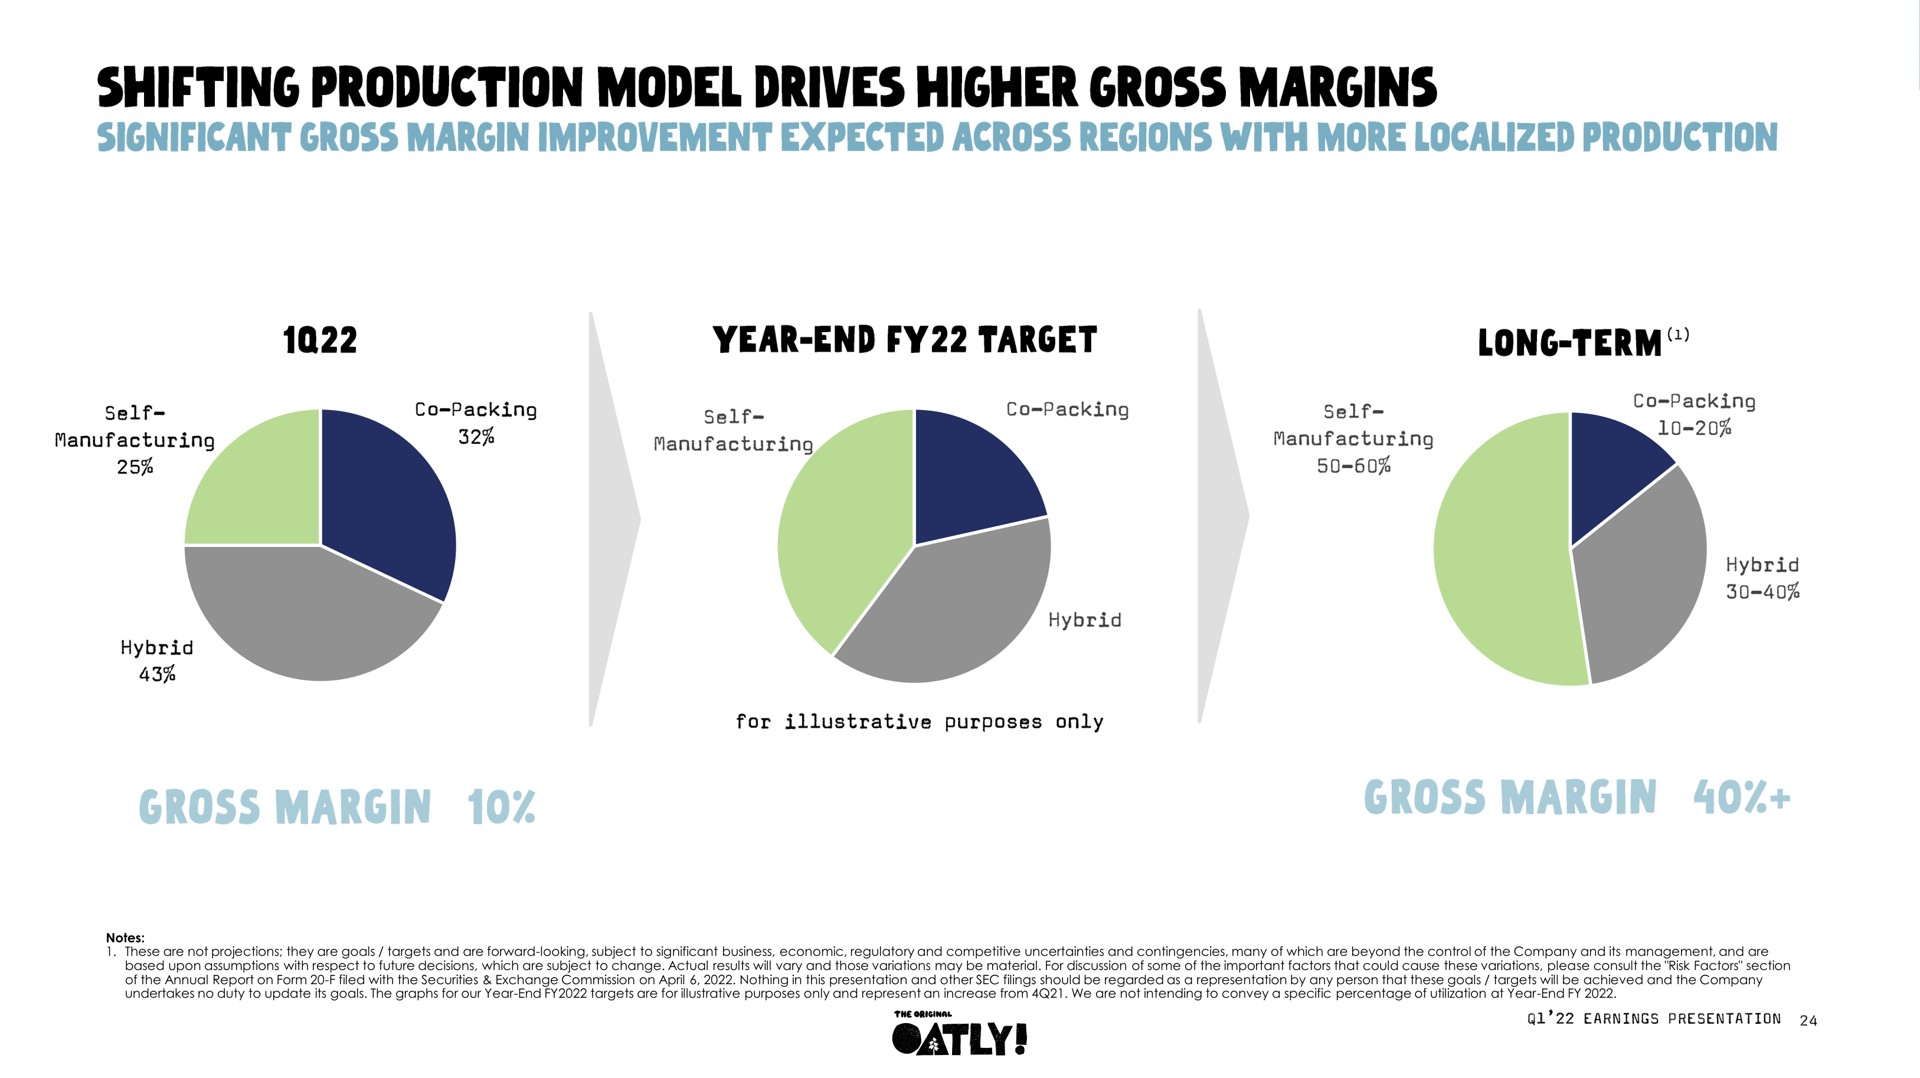 shifting production model drives higher gross margins significant gross margin improvement expected across regions with more localized production | Oatly